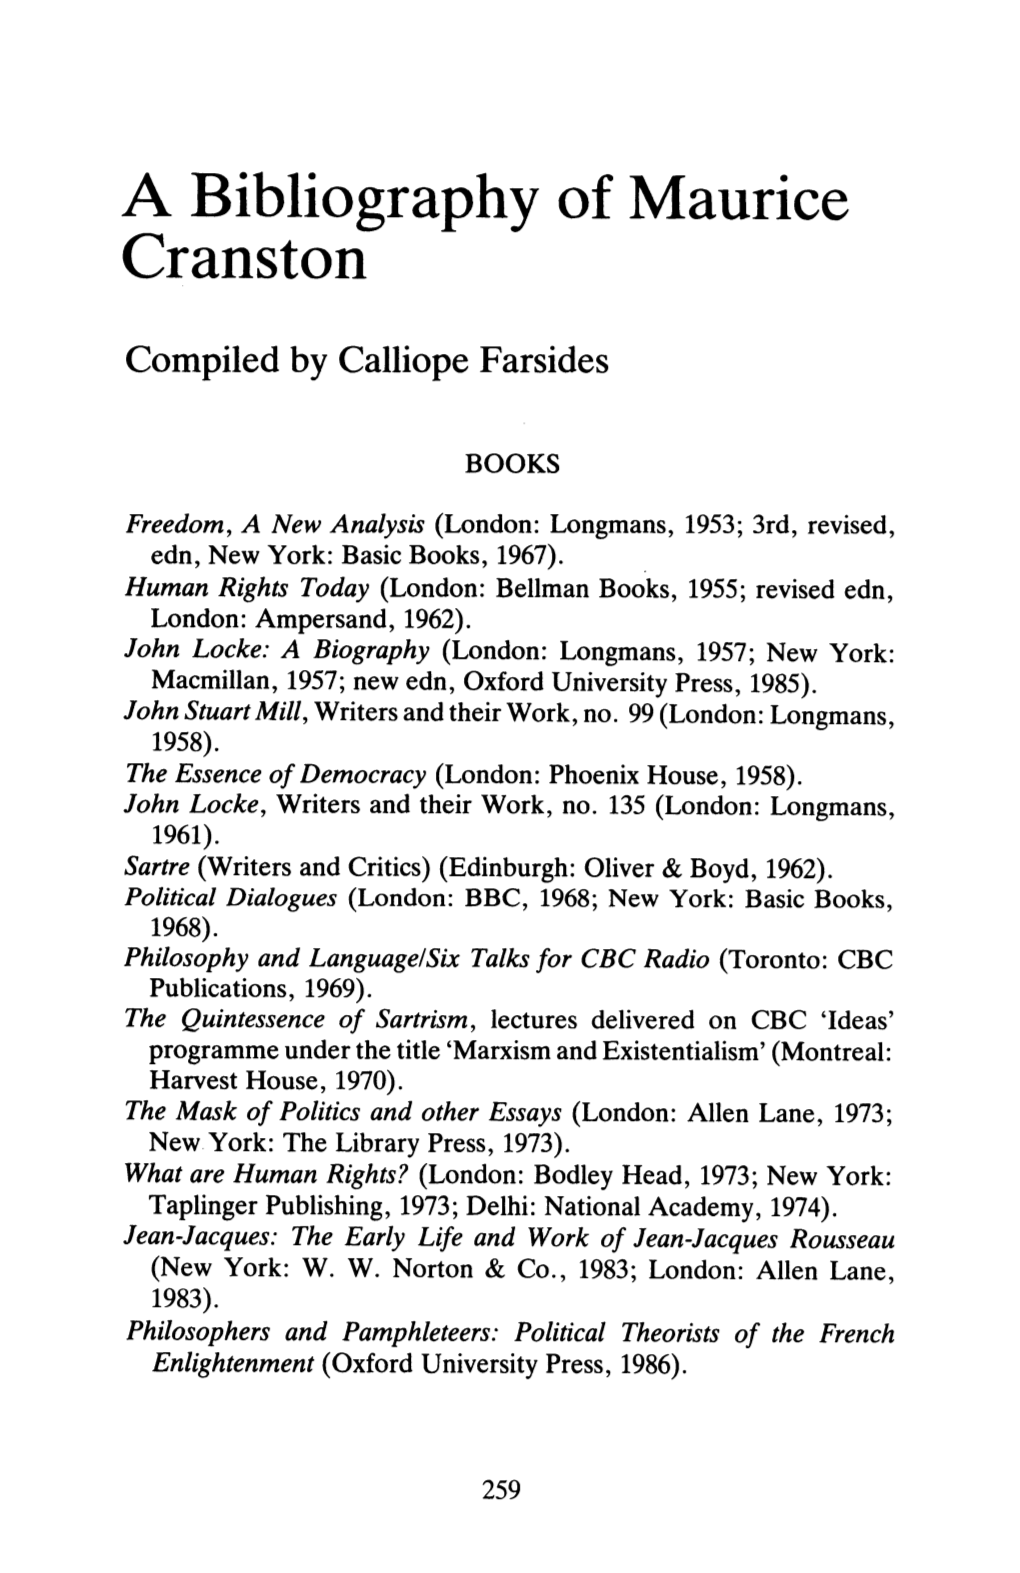 A Bibliography of Maurice Cranston